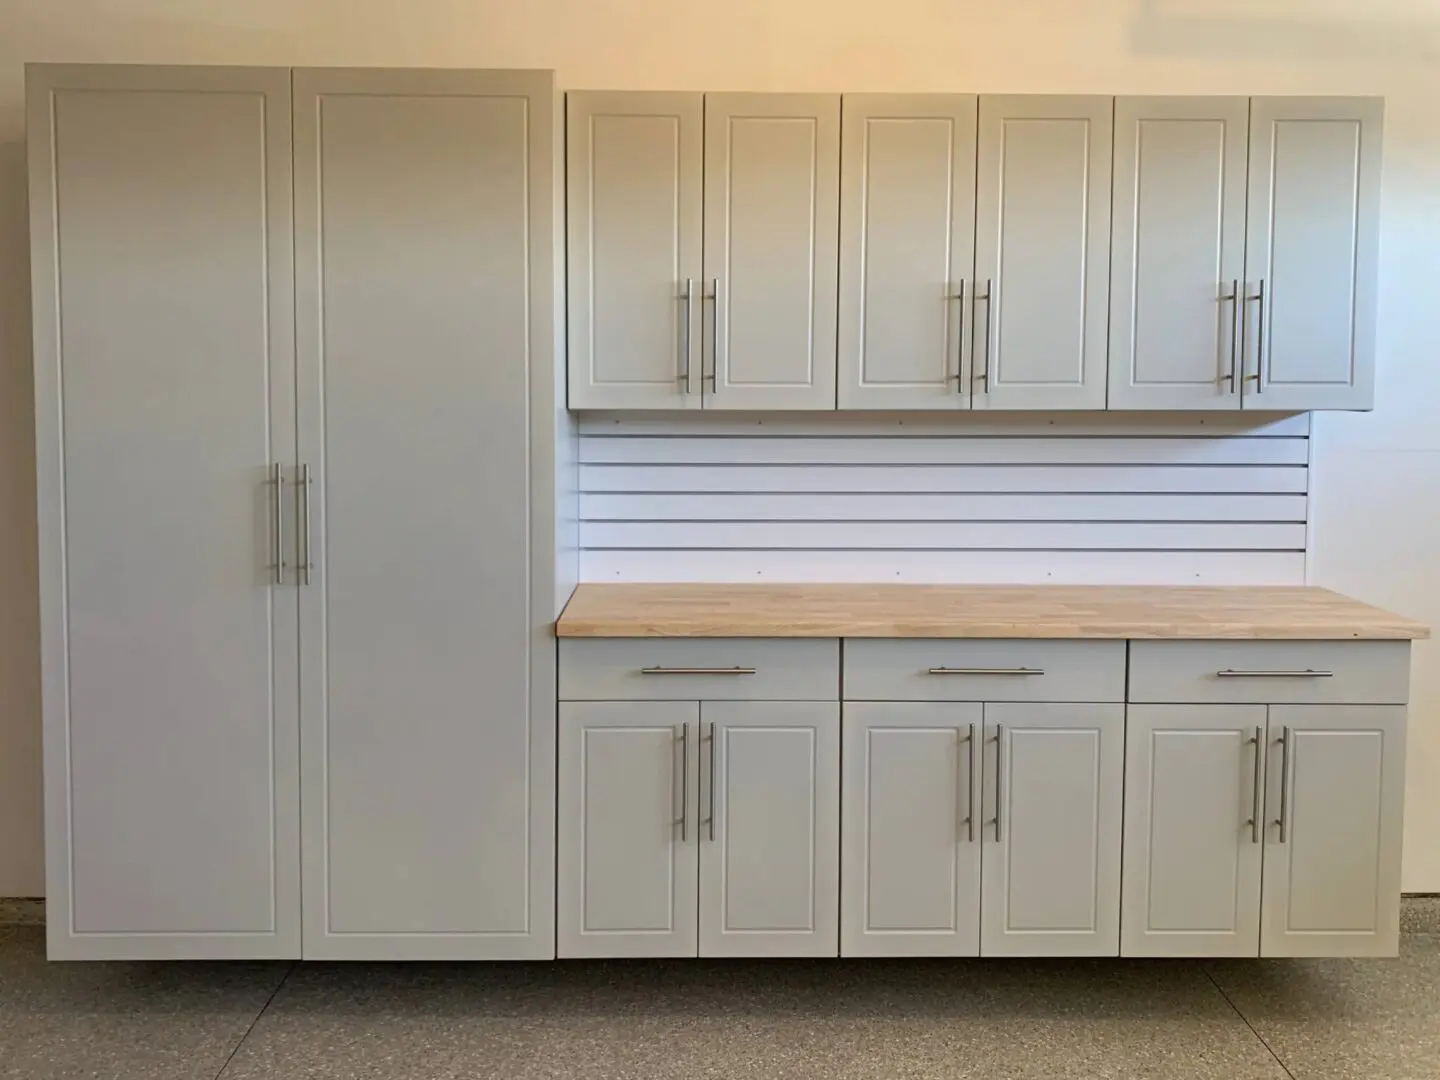 A room with many cabinets and drawers in it